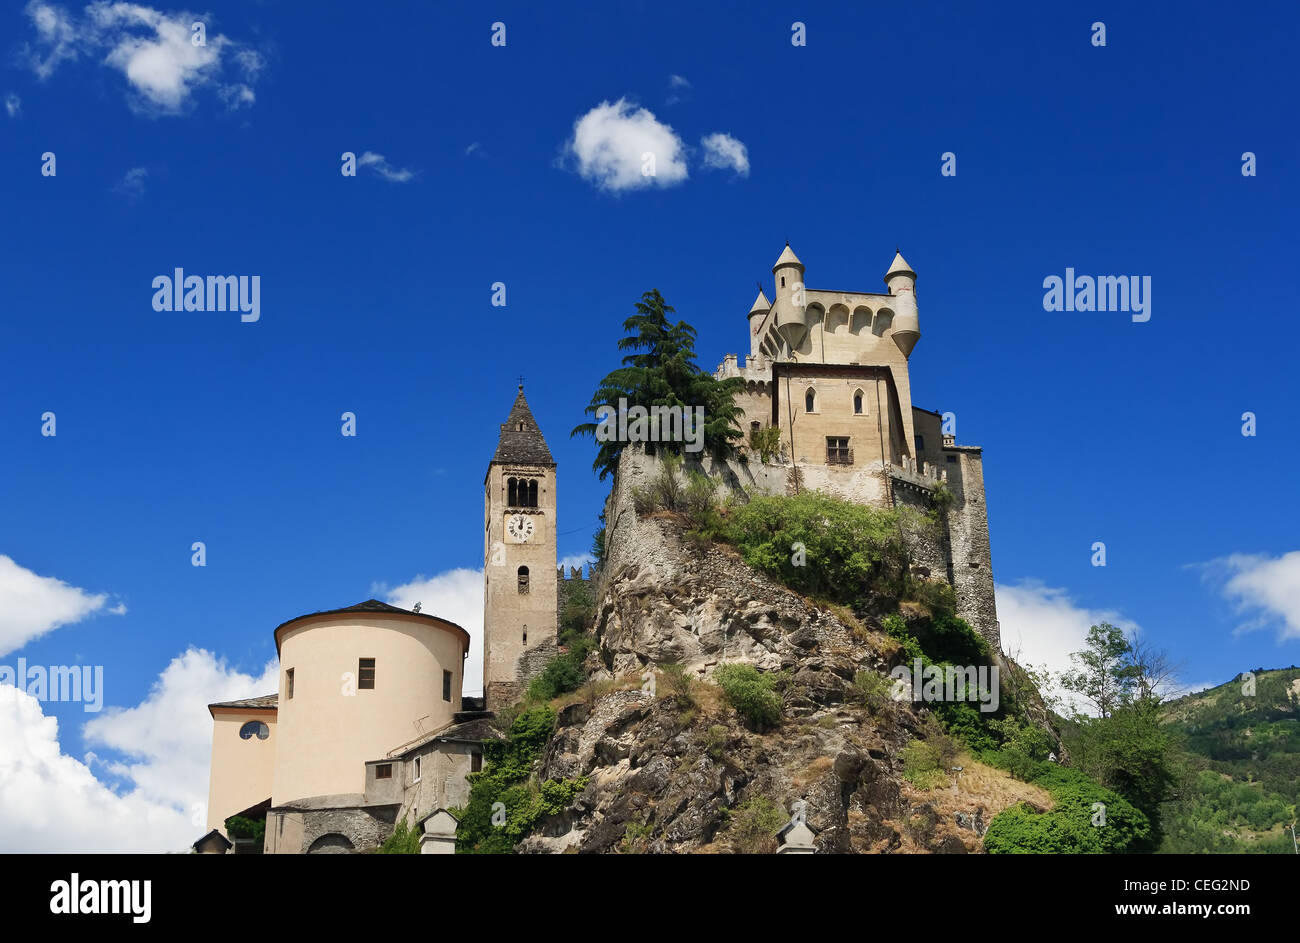 exterior of Saint-Pierre Castle and church in Aosta valley, Italy Stock Photo